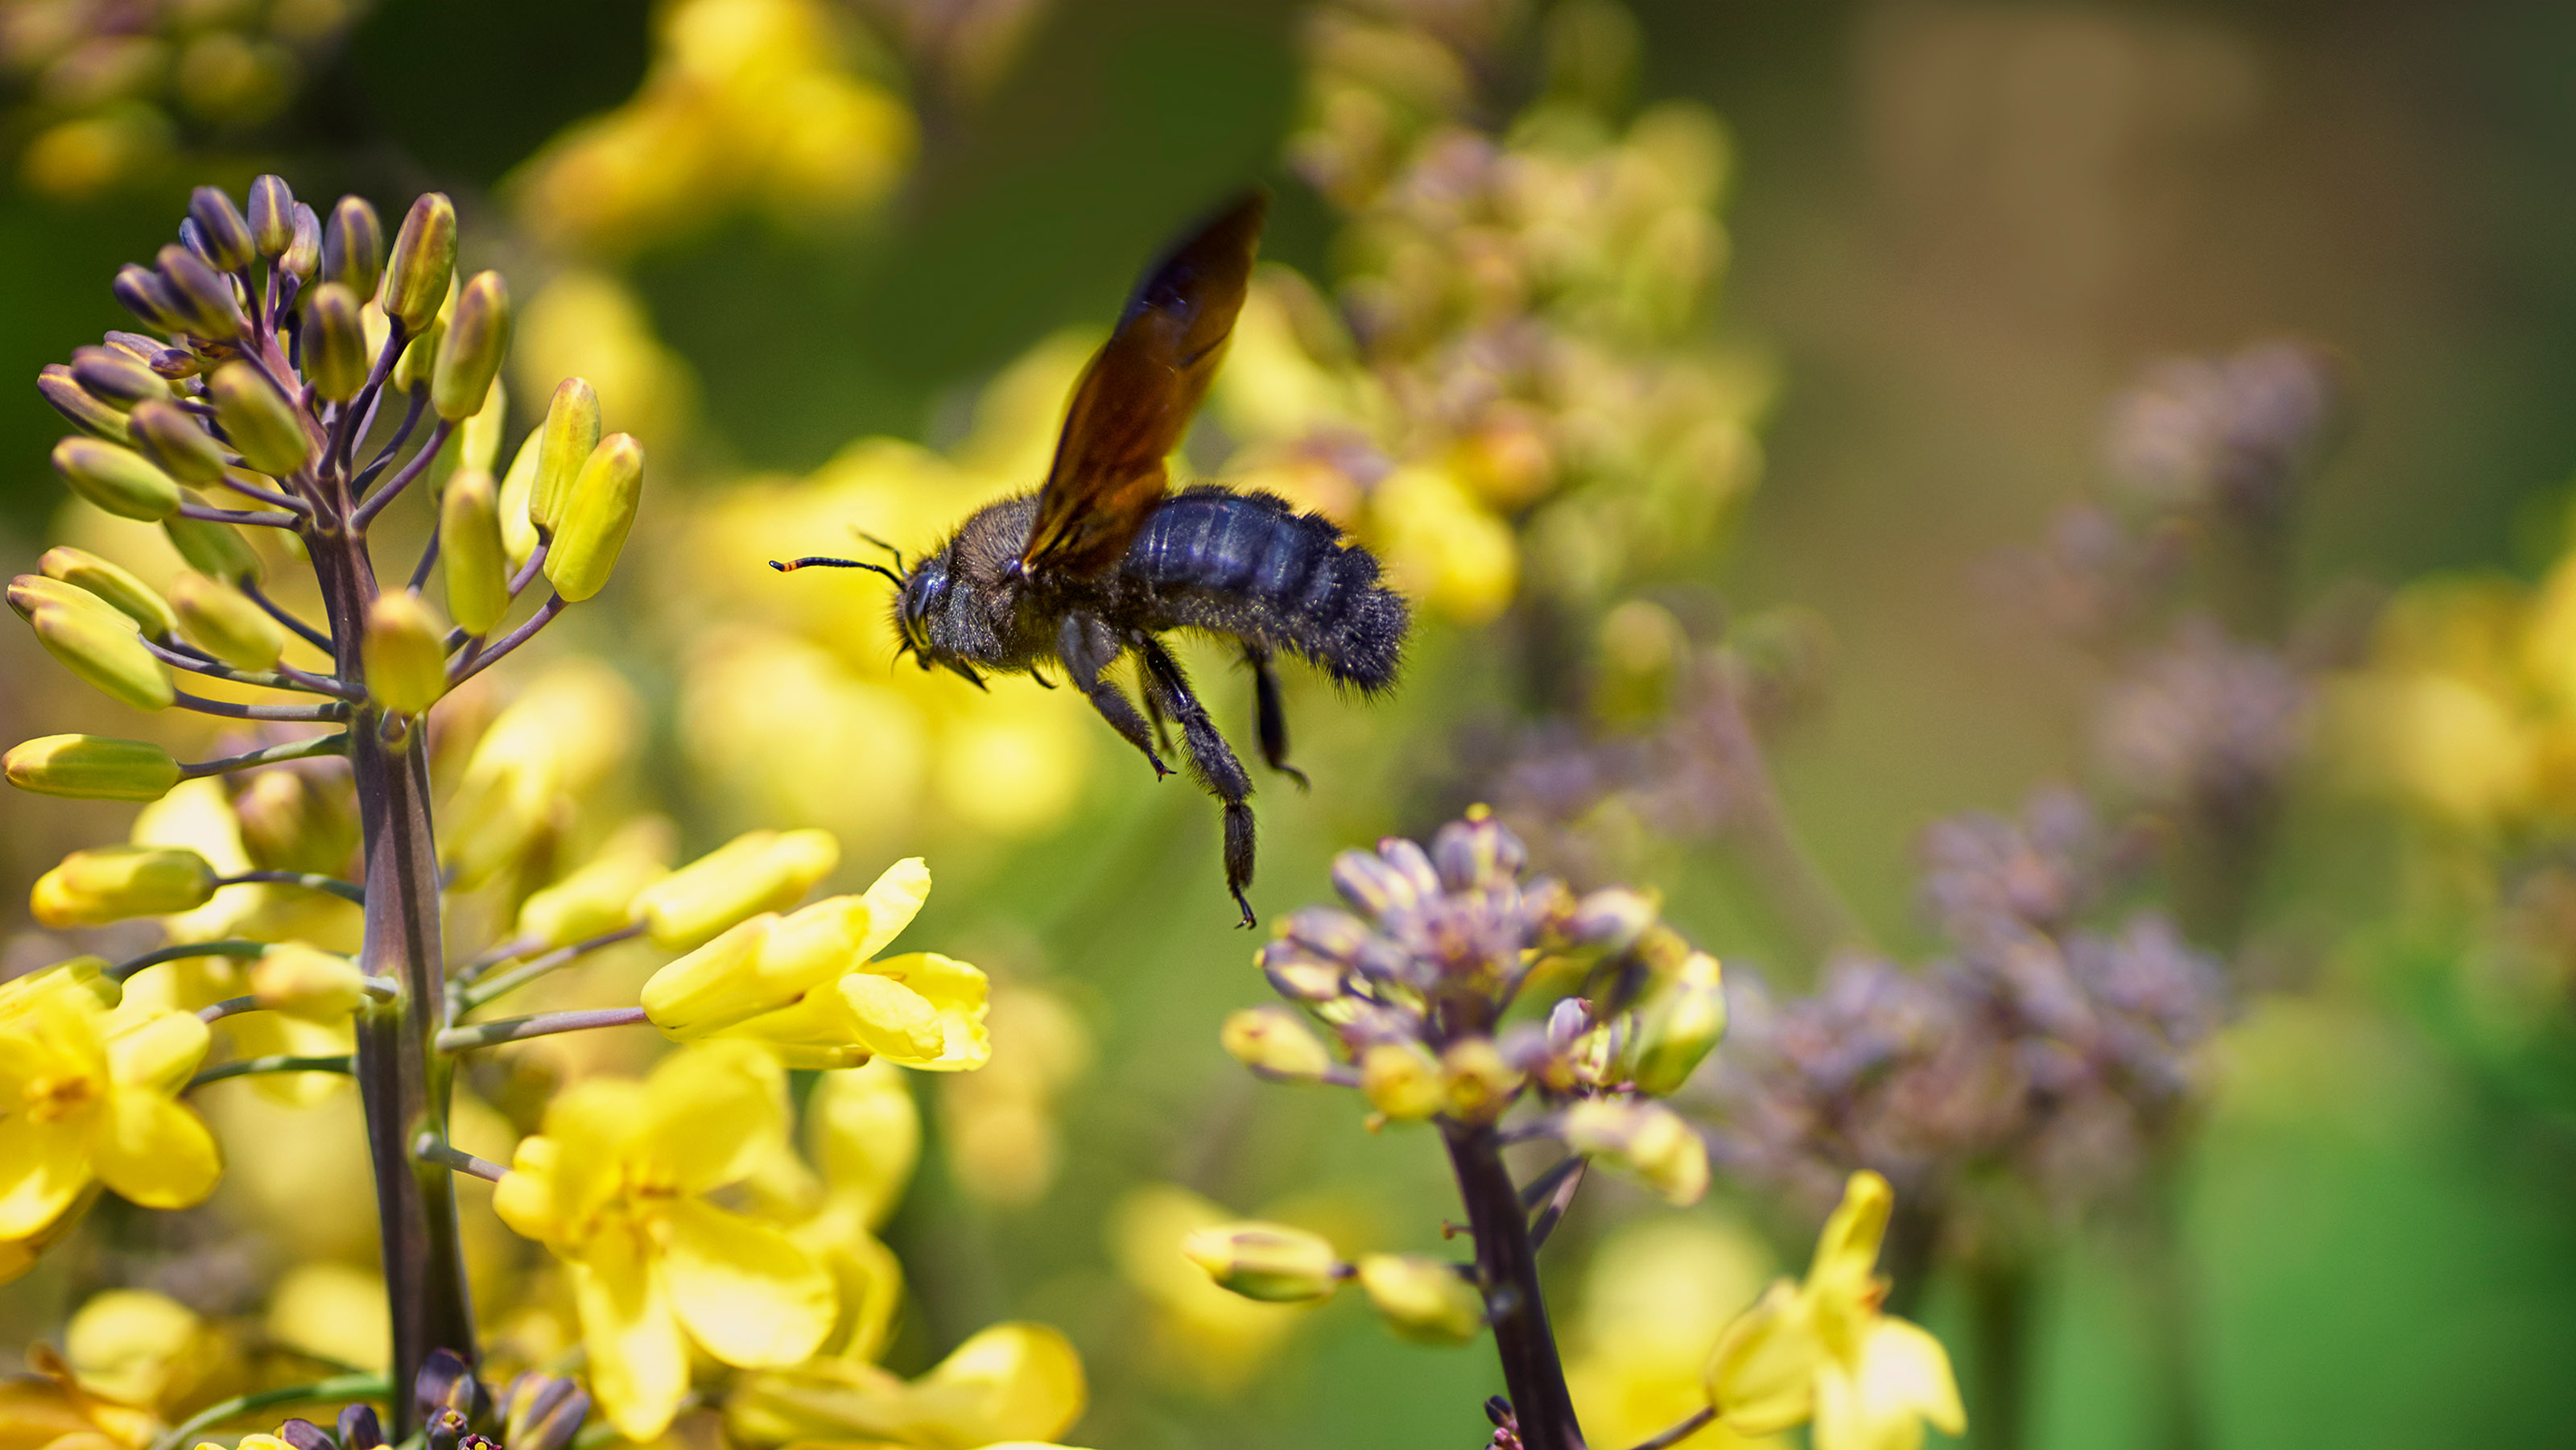 How to get rid of carpenter bees protect wooden